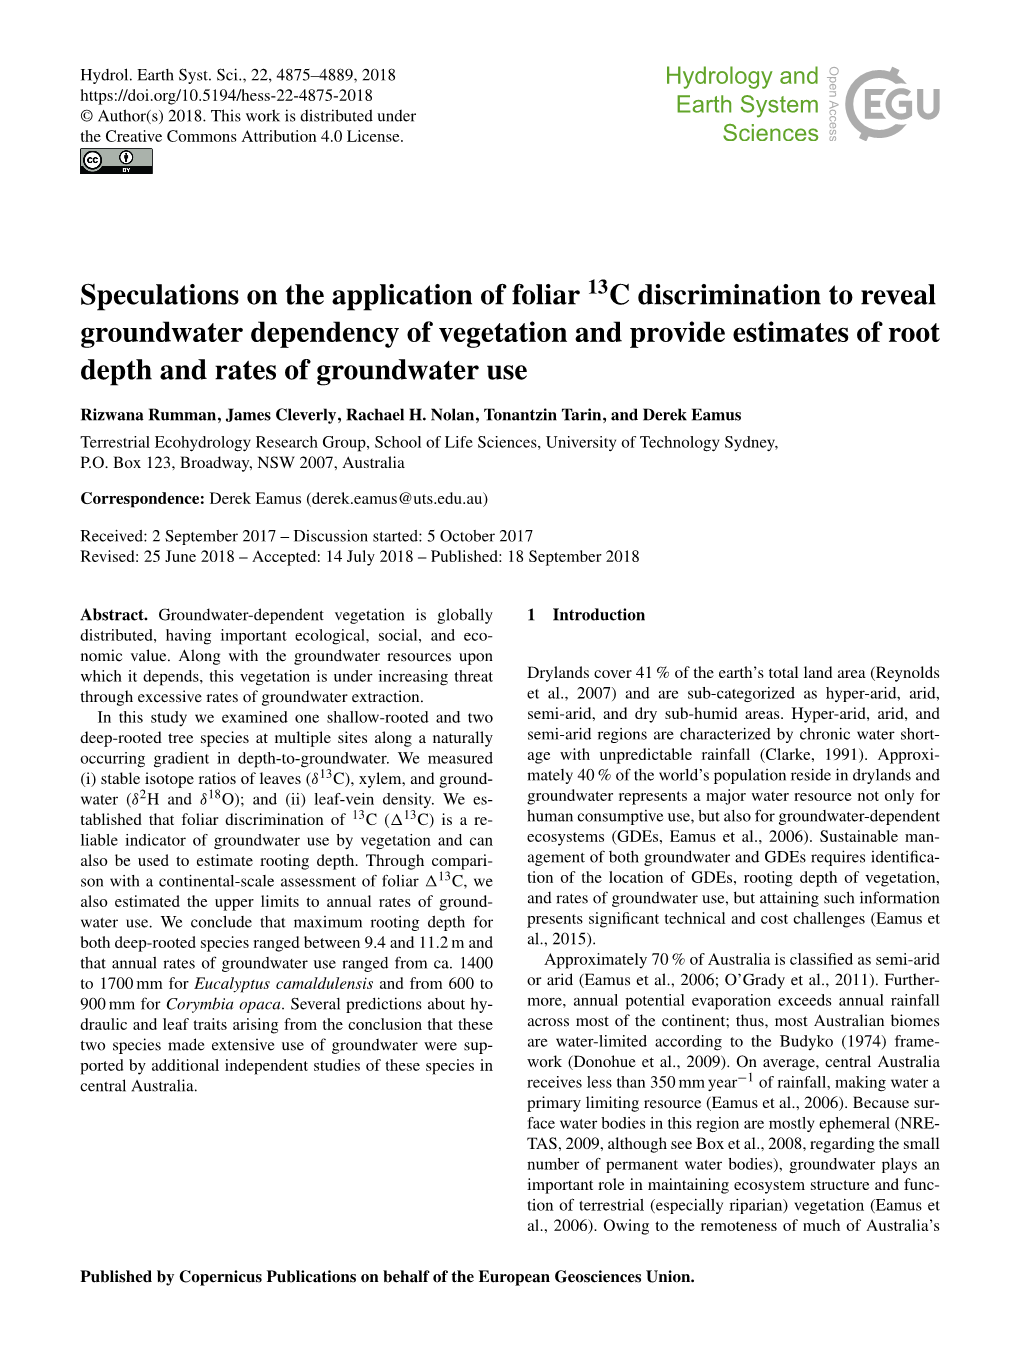 Article Is Available Draulics and Stomatal Control in Leaves, Plant Cell Environ., 31, Online At